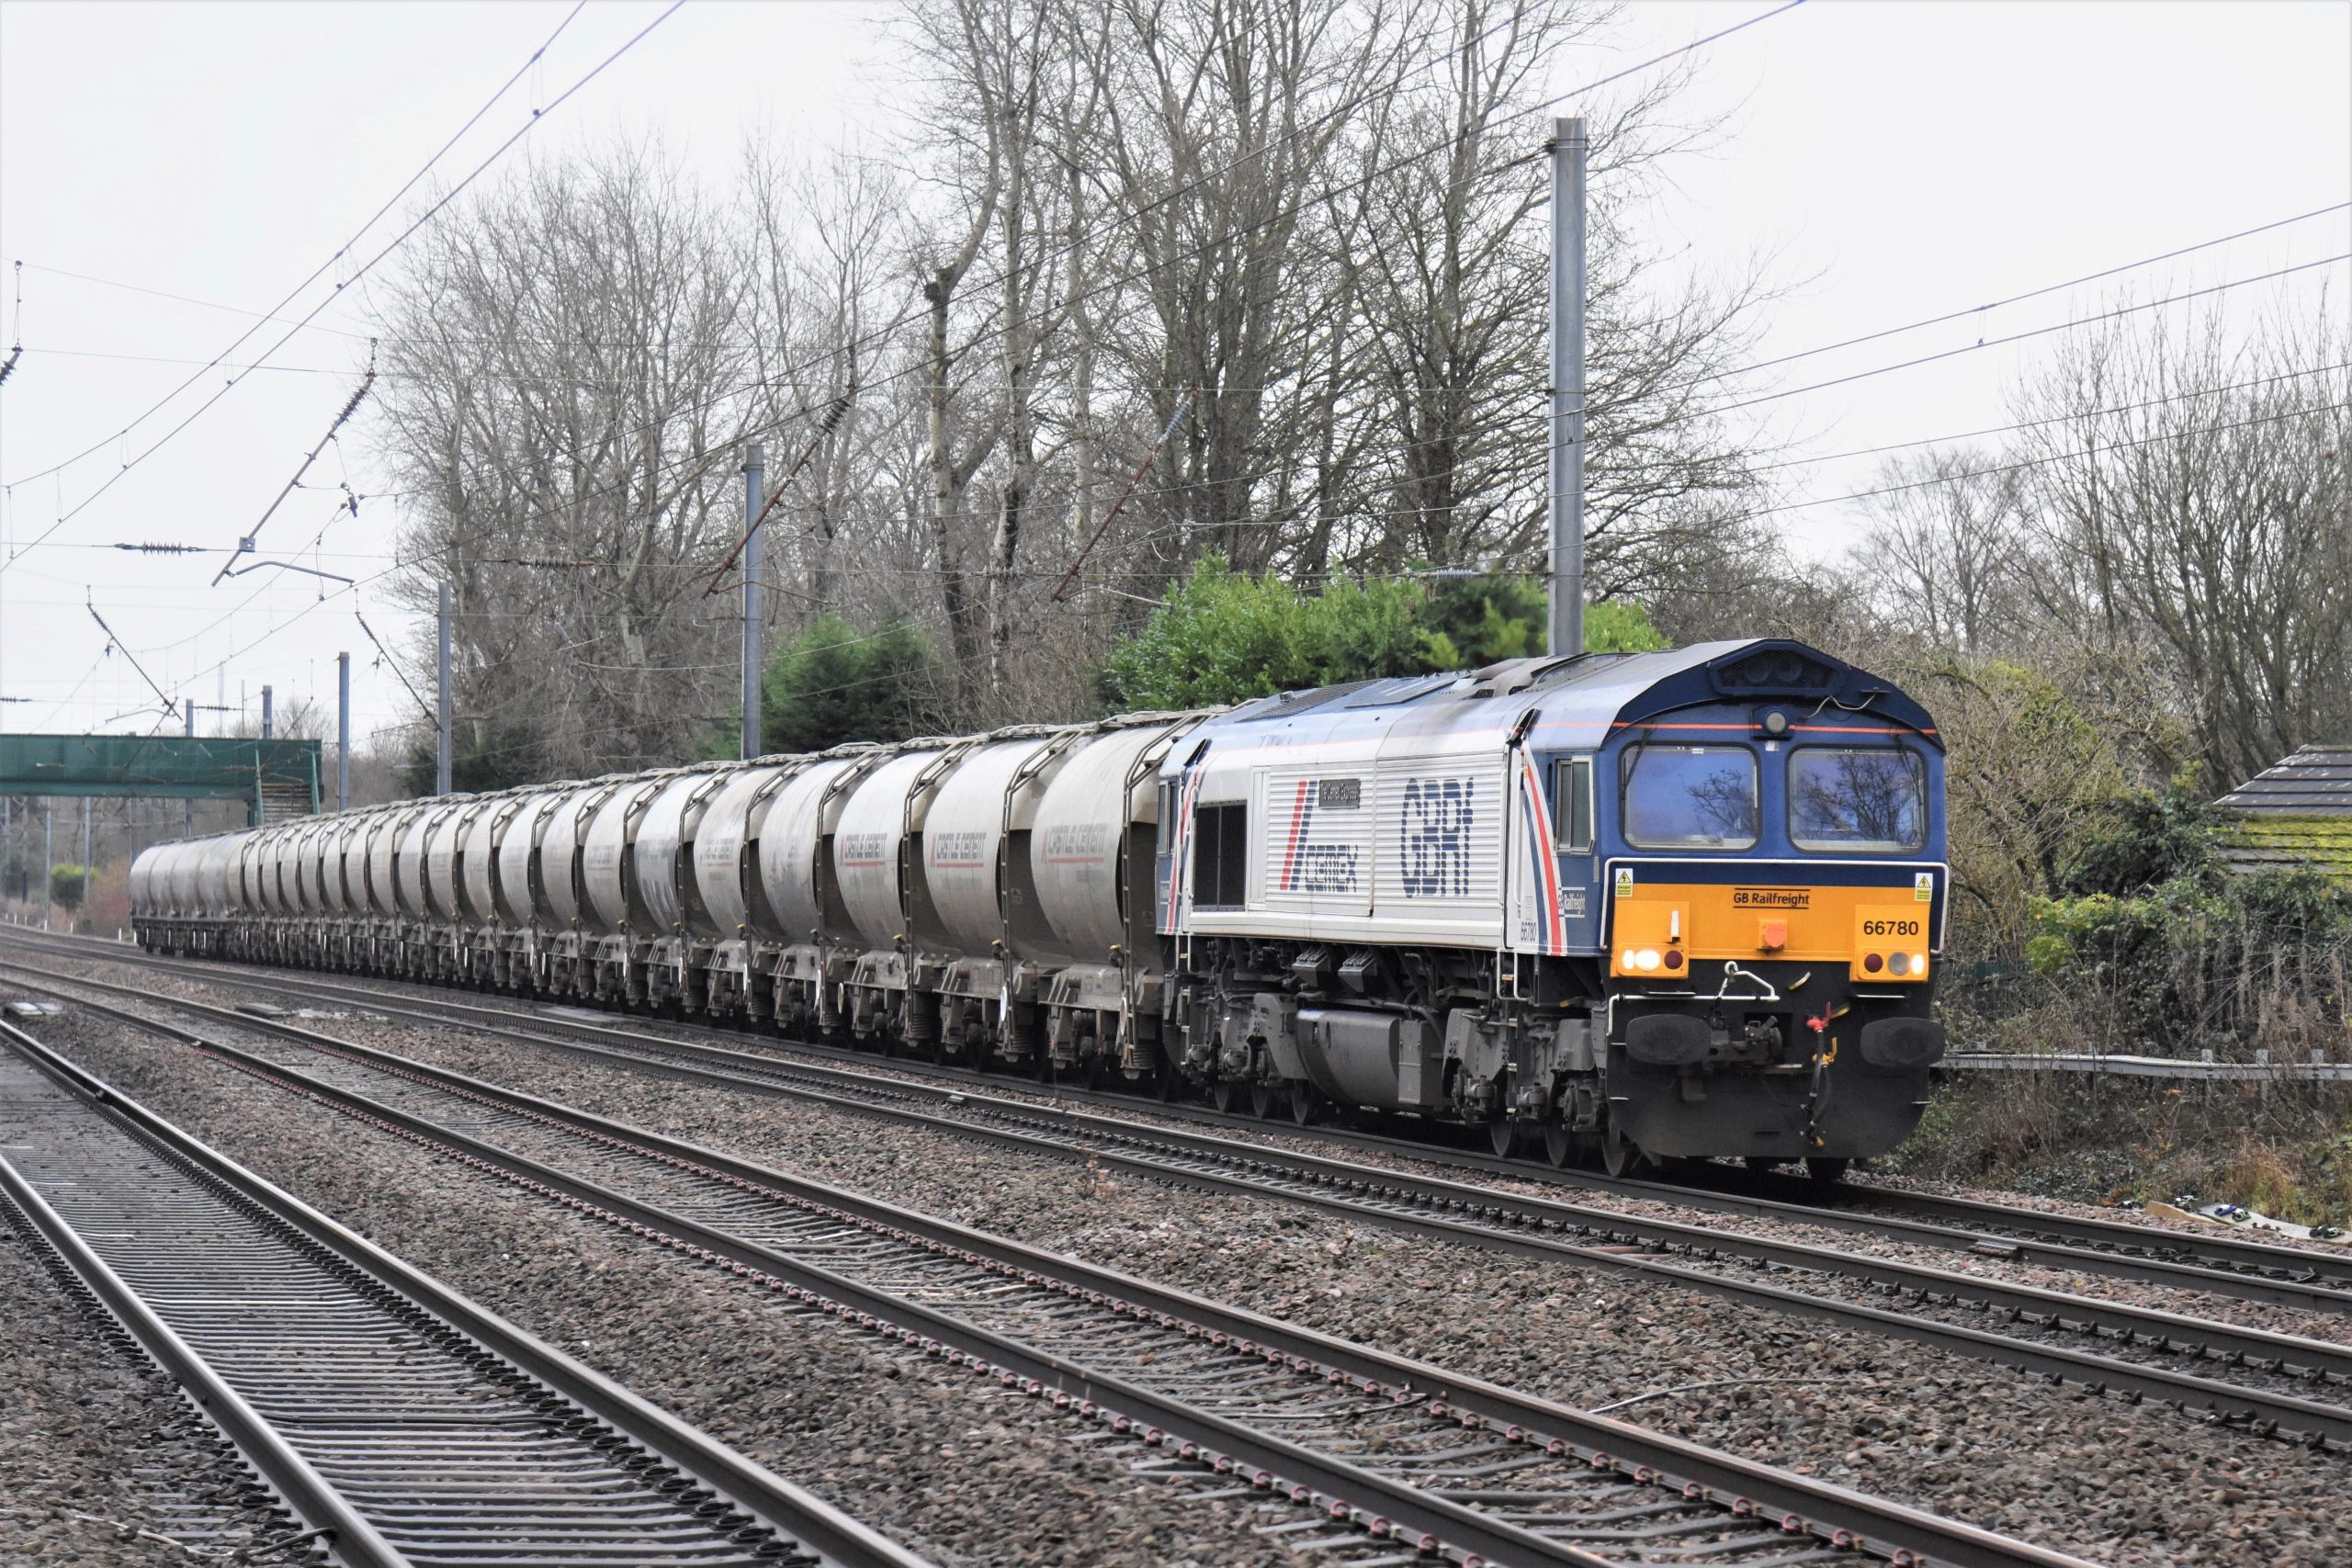 Cemex liveried 66780 "The Cemex Express" is seen near Balshaw Lane and Euxton on 11th December 2021 · Image credit: John Sloane